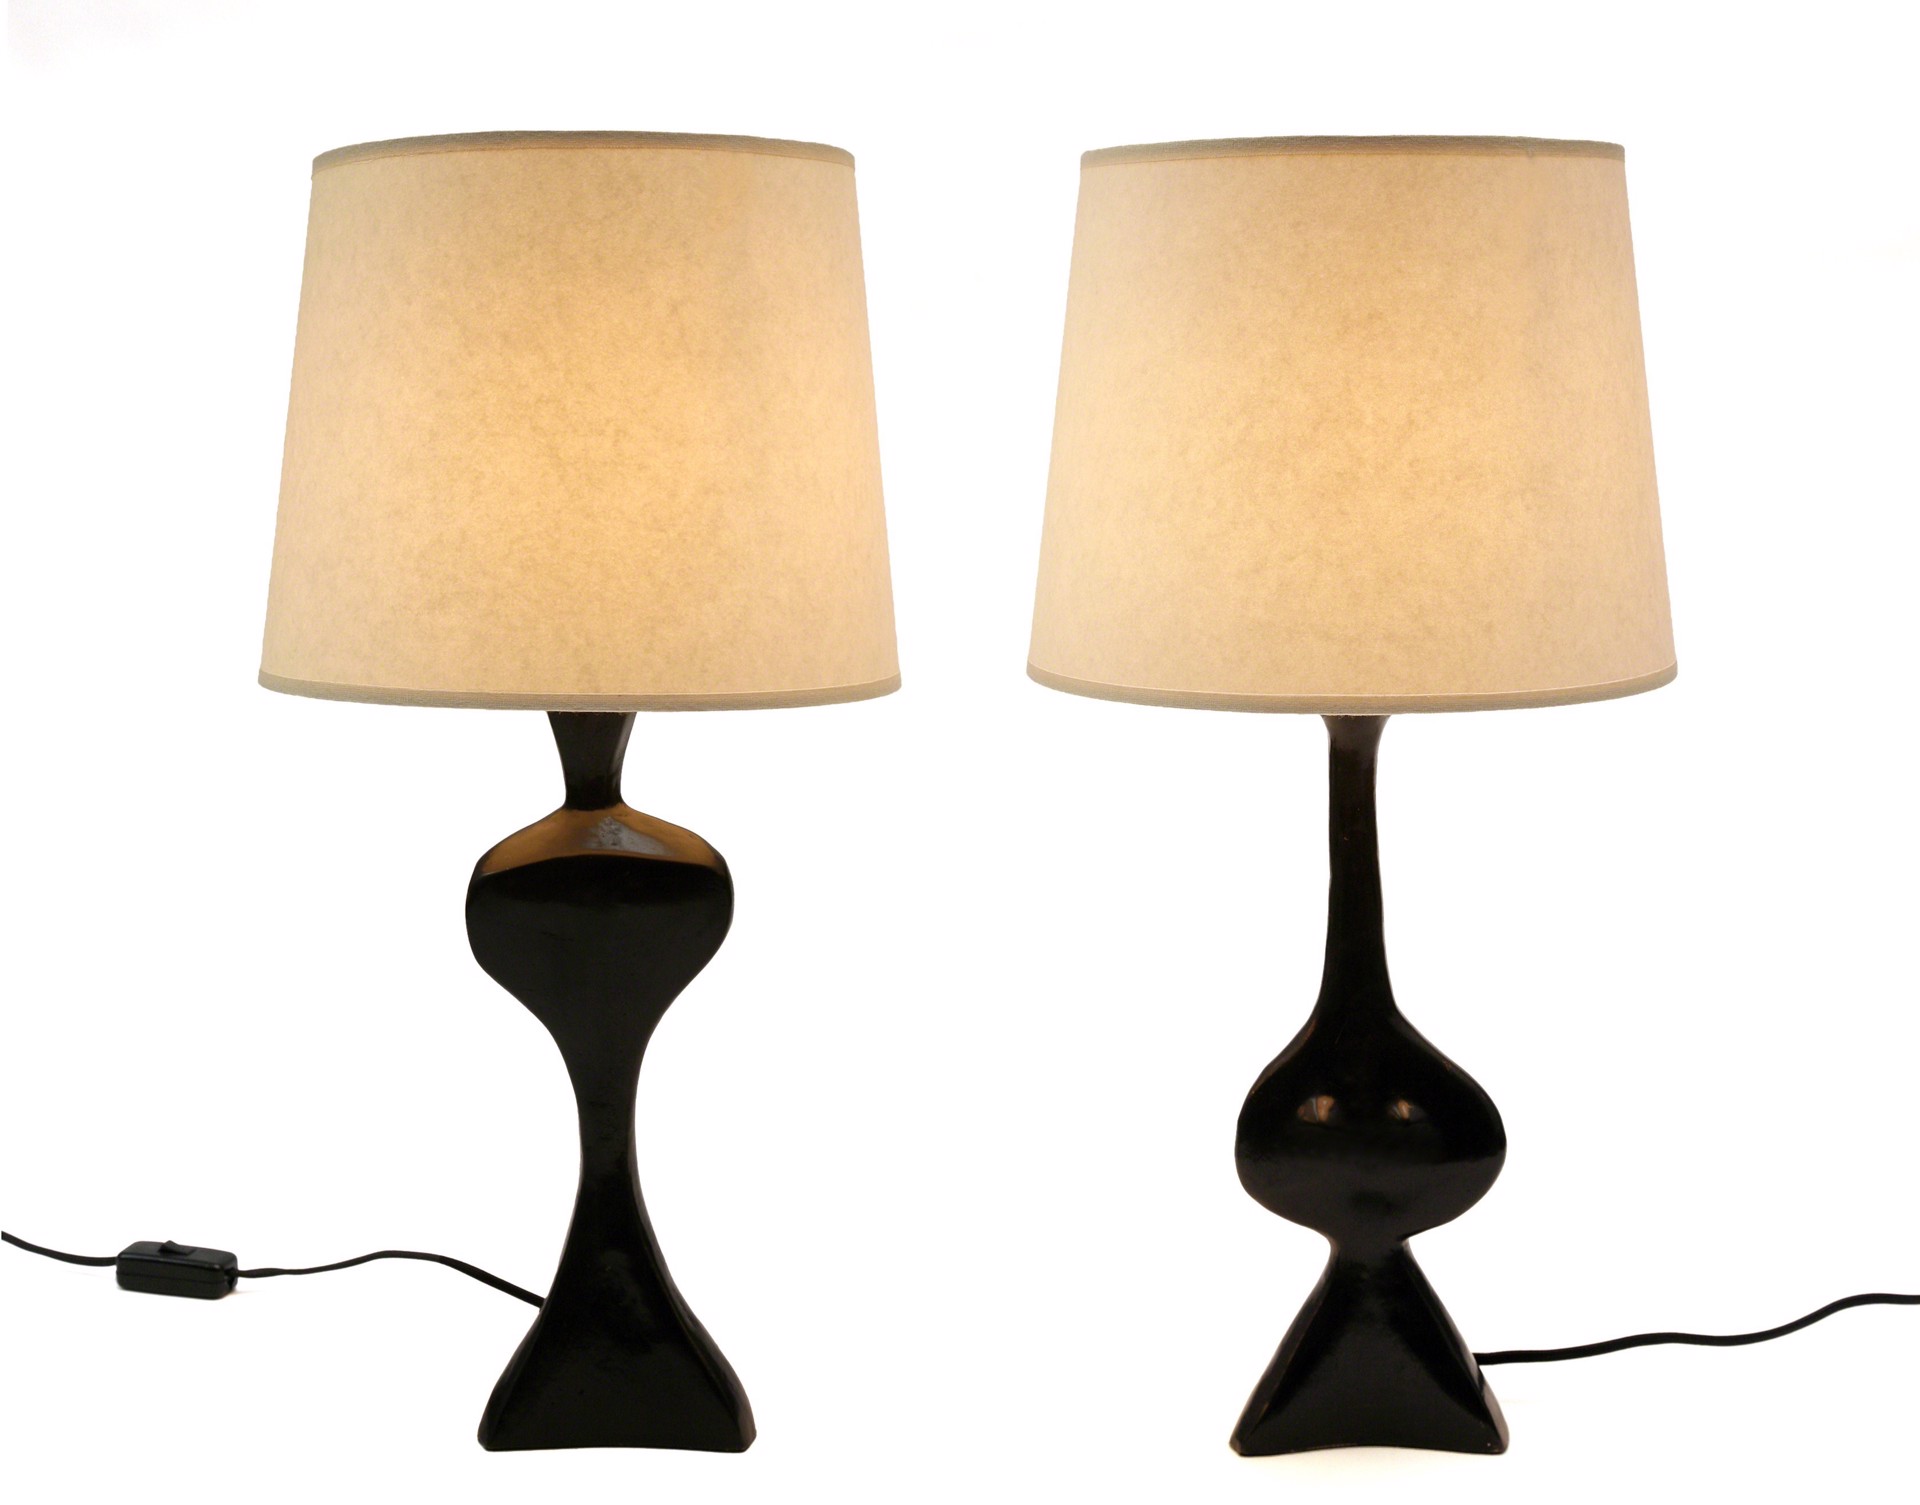 "Adam and Eve" Lamps by Jacques Jarrige